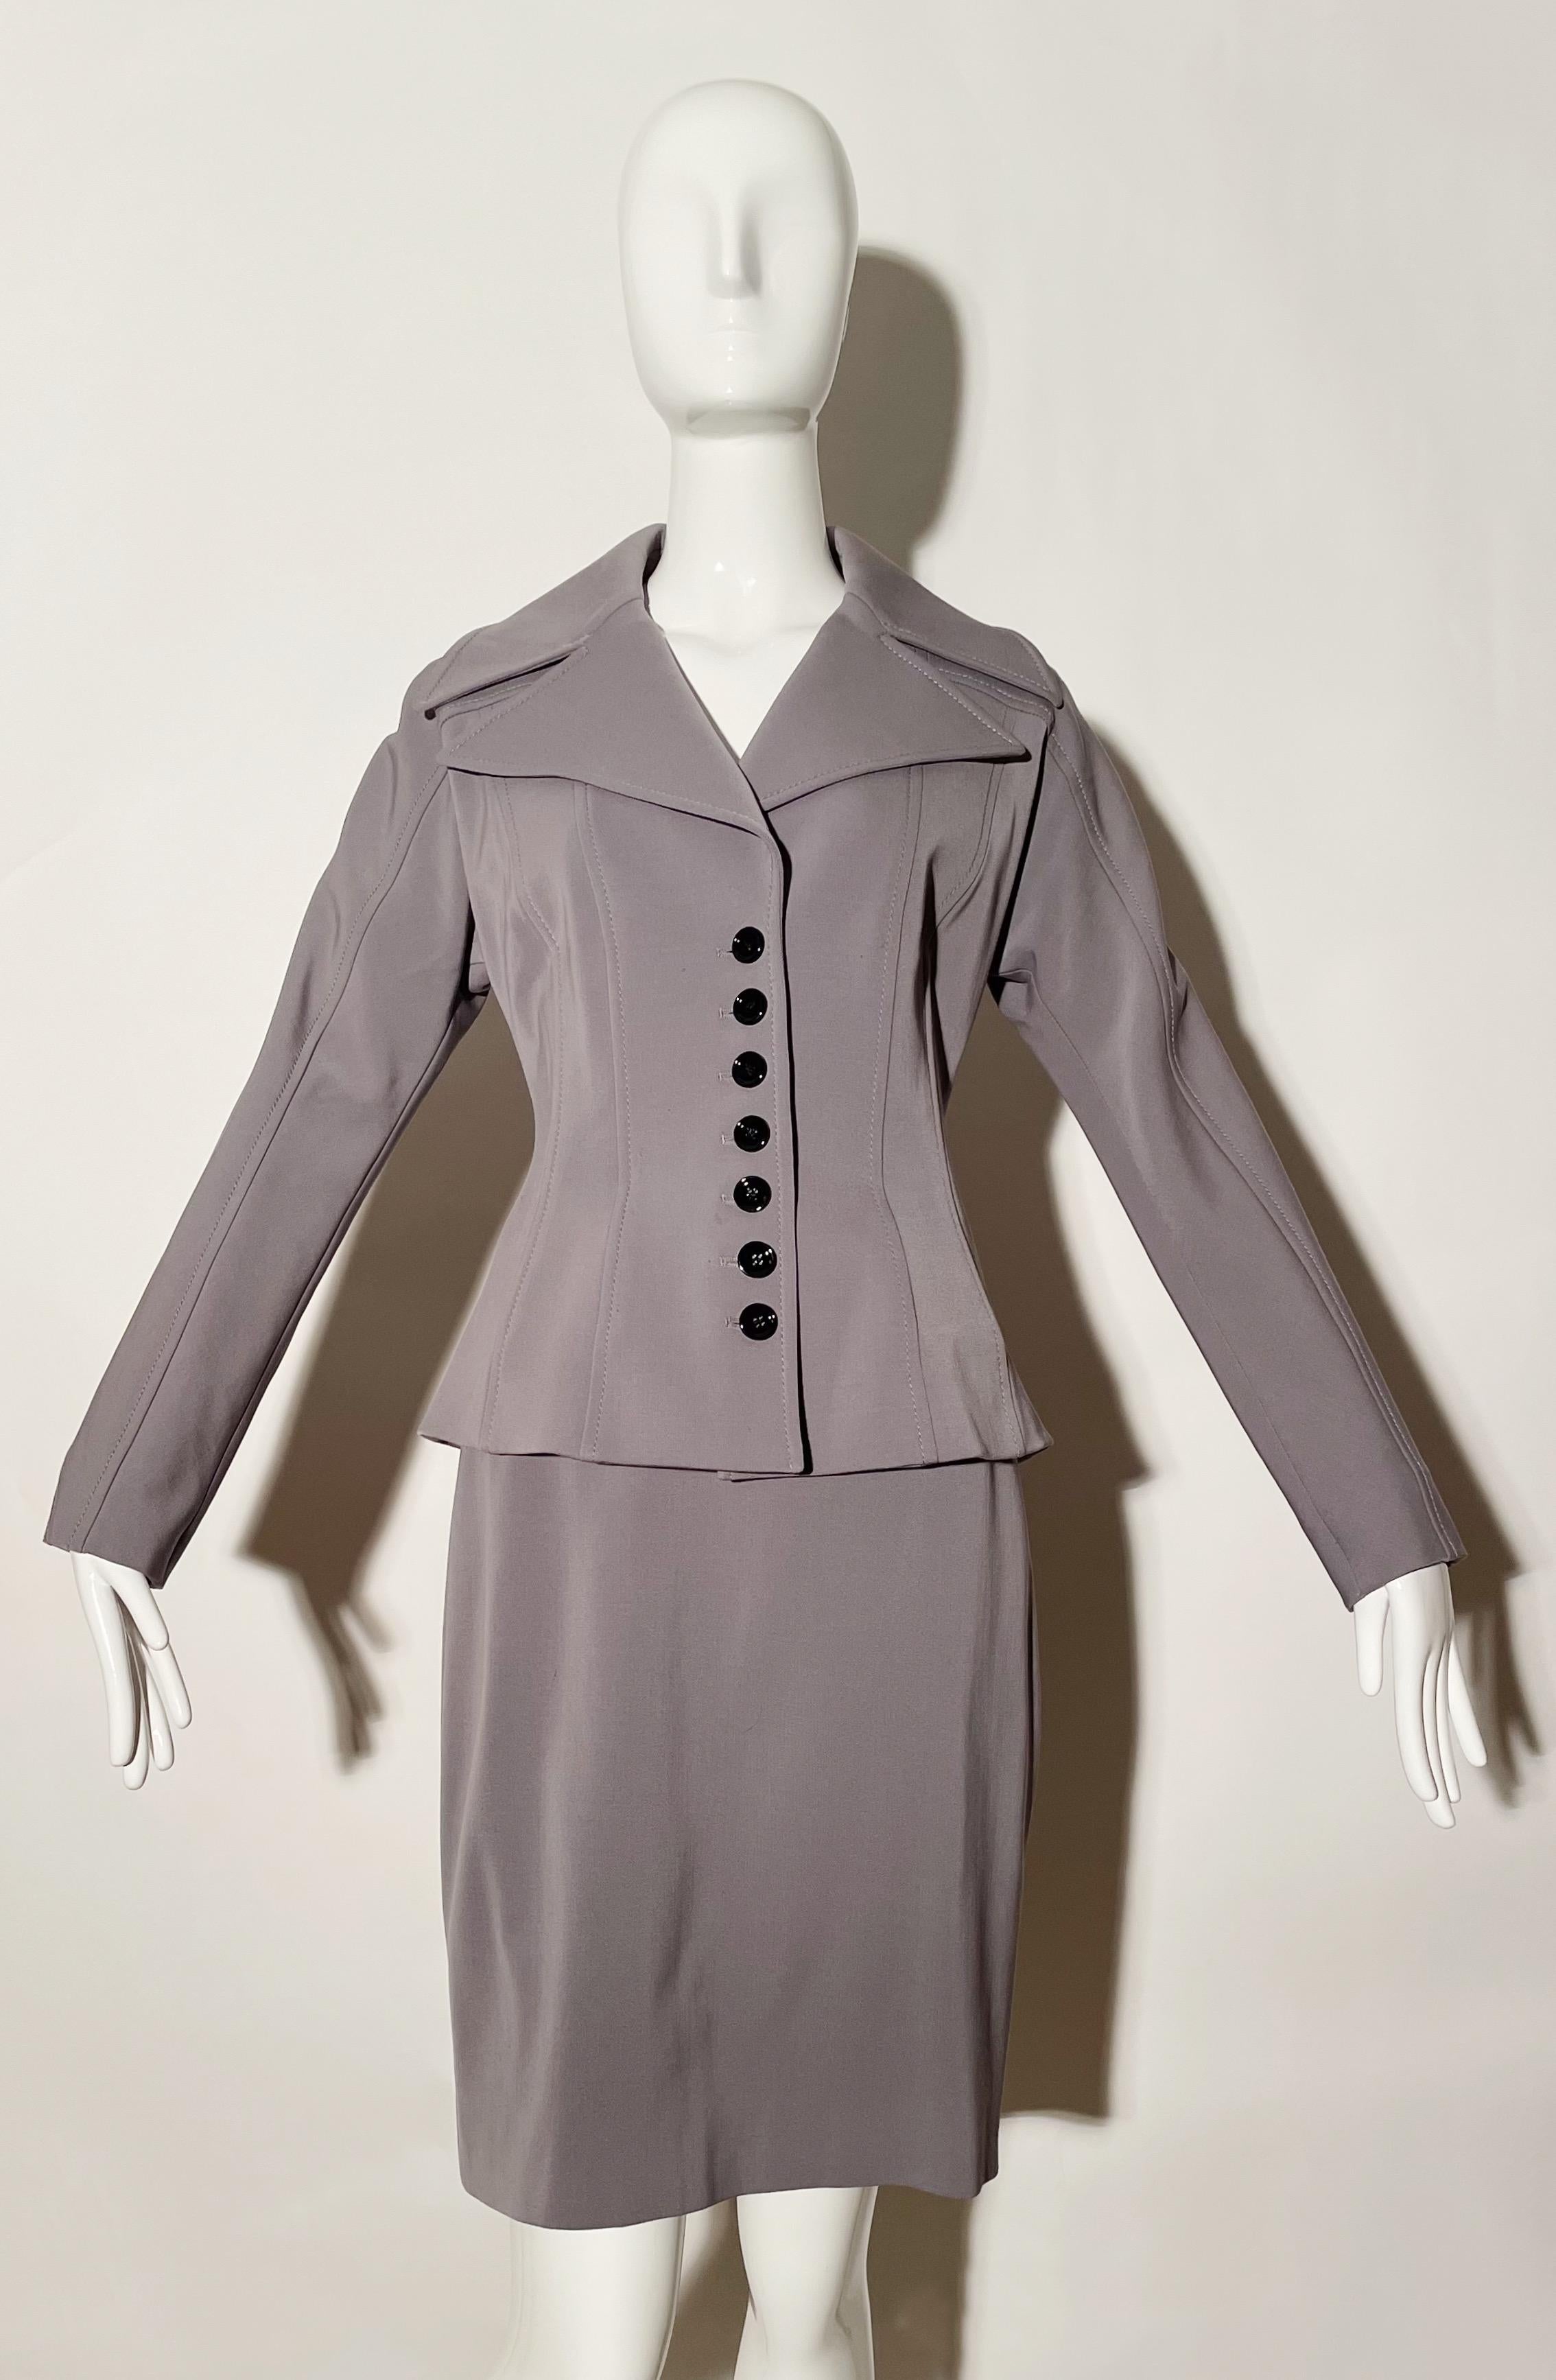 Grey skirt suit. Corset piping detail. Front buttons. Large collar. Stretchy. Made in Italy. 
*Condition: Excellent vintage condition. Visible Flaw ( as pictured) 

Measurements Taken Laying Flat (inches)—
Shoulder to Shoulder: 17 in.
Sleeve Length: